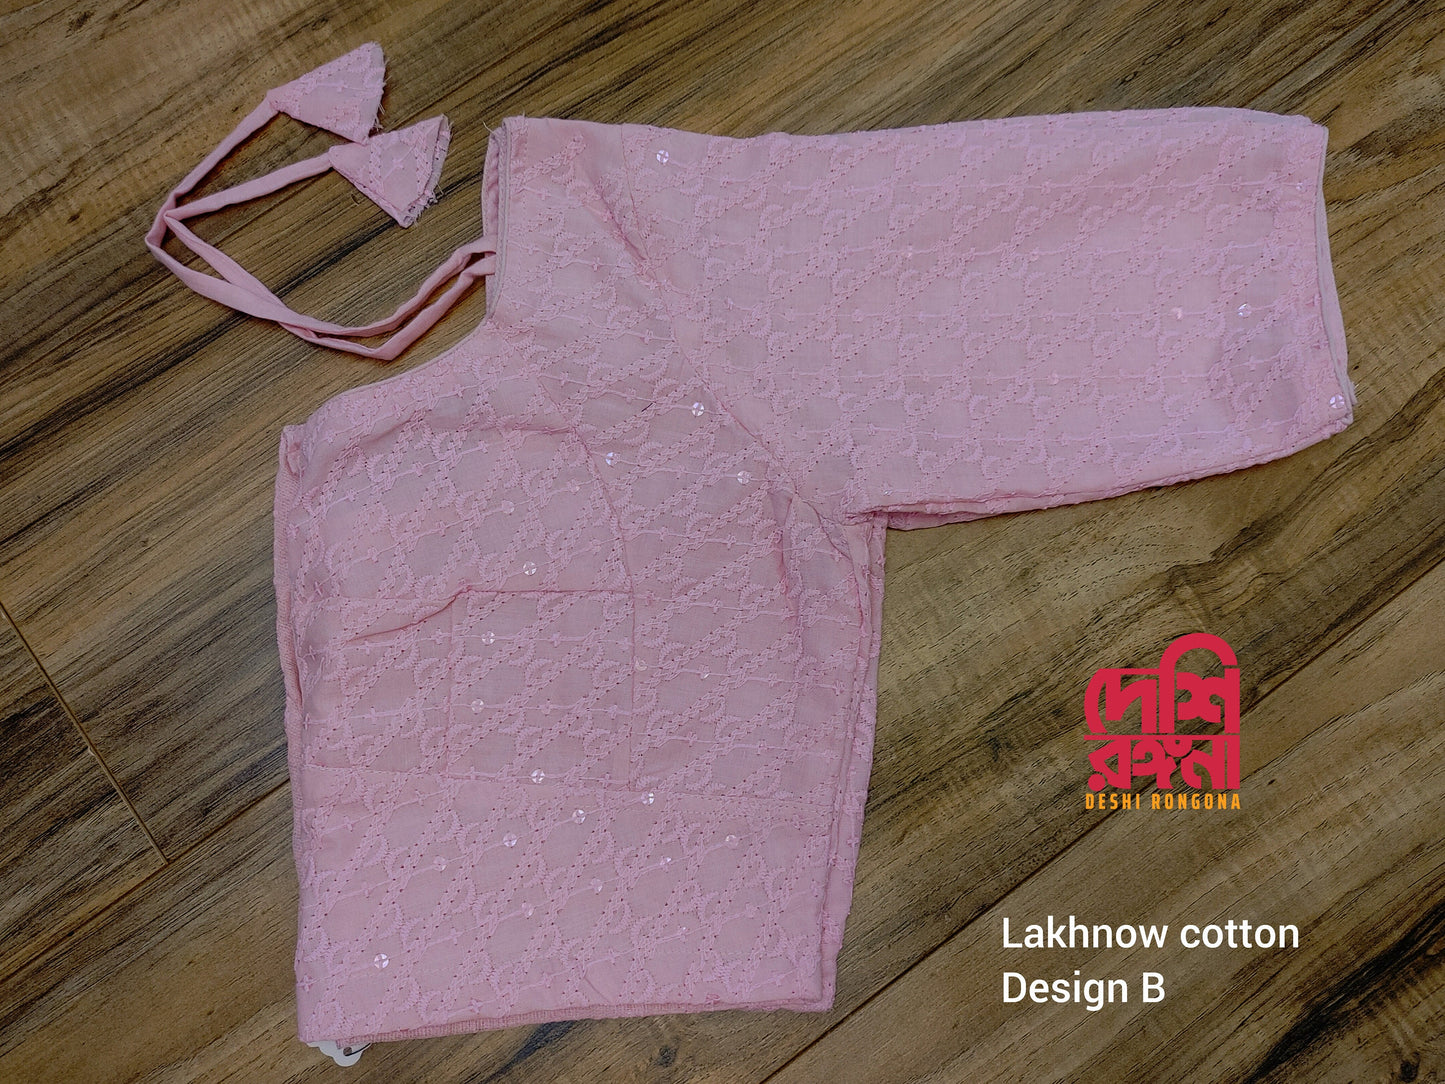 Readymade Lakhnaw Cotton Pink Blouse, Soft, plain sleeves,Size 34/36 Designer Blouse, Embroidered, Comfortable, goes with any contrast saree